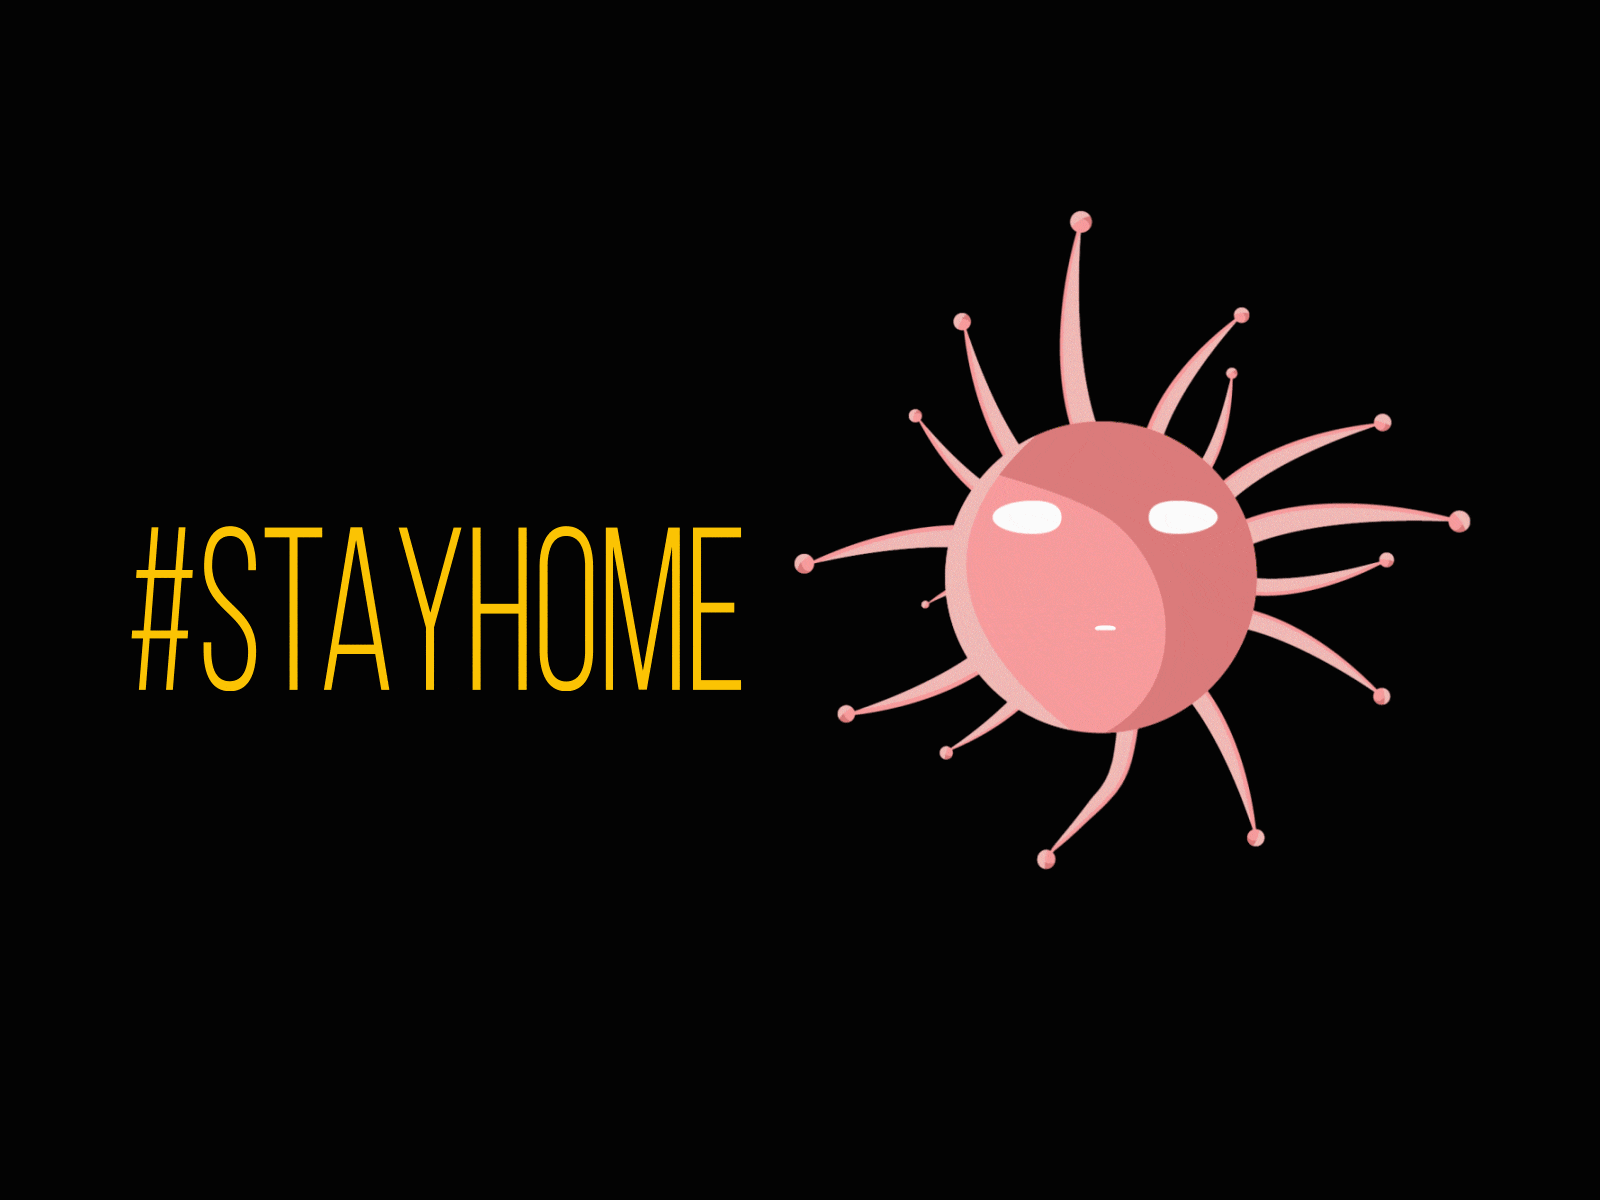 Stay Home 🏠 2020 ae after effect animate bactery character corona coronavirus covid19 design gif health home illustration illustrator motion simple stayhome virus